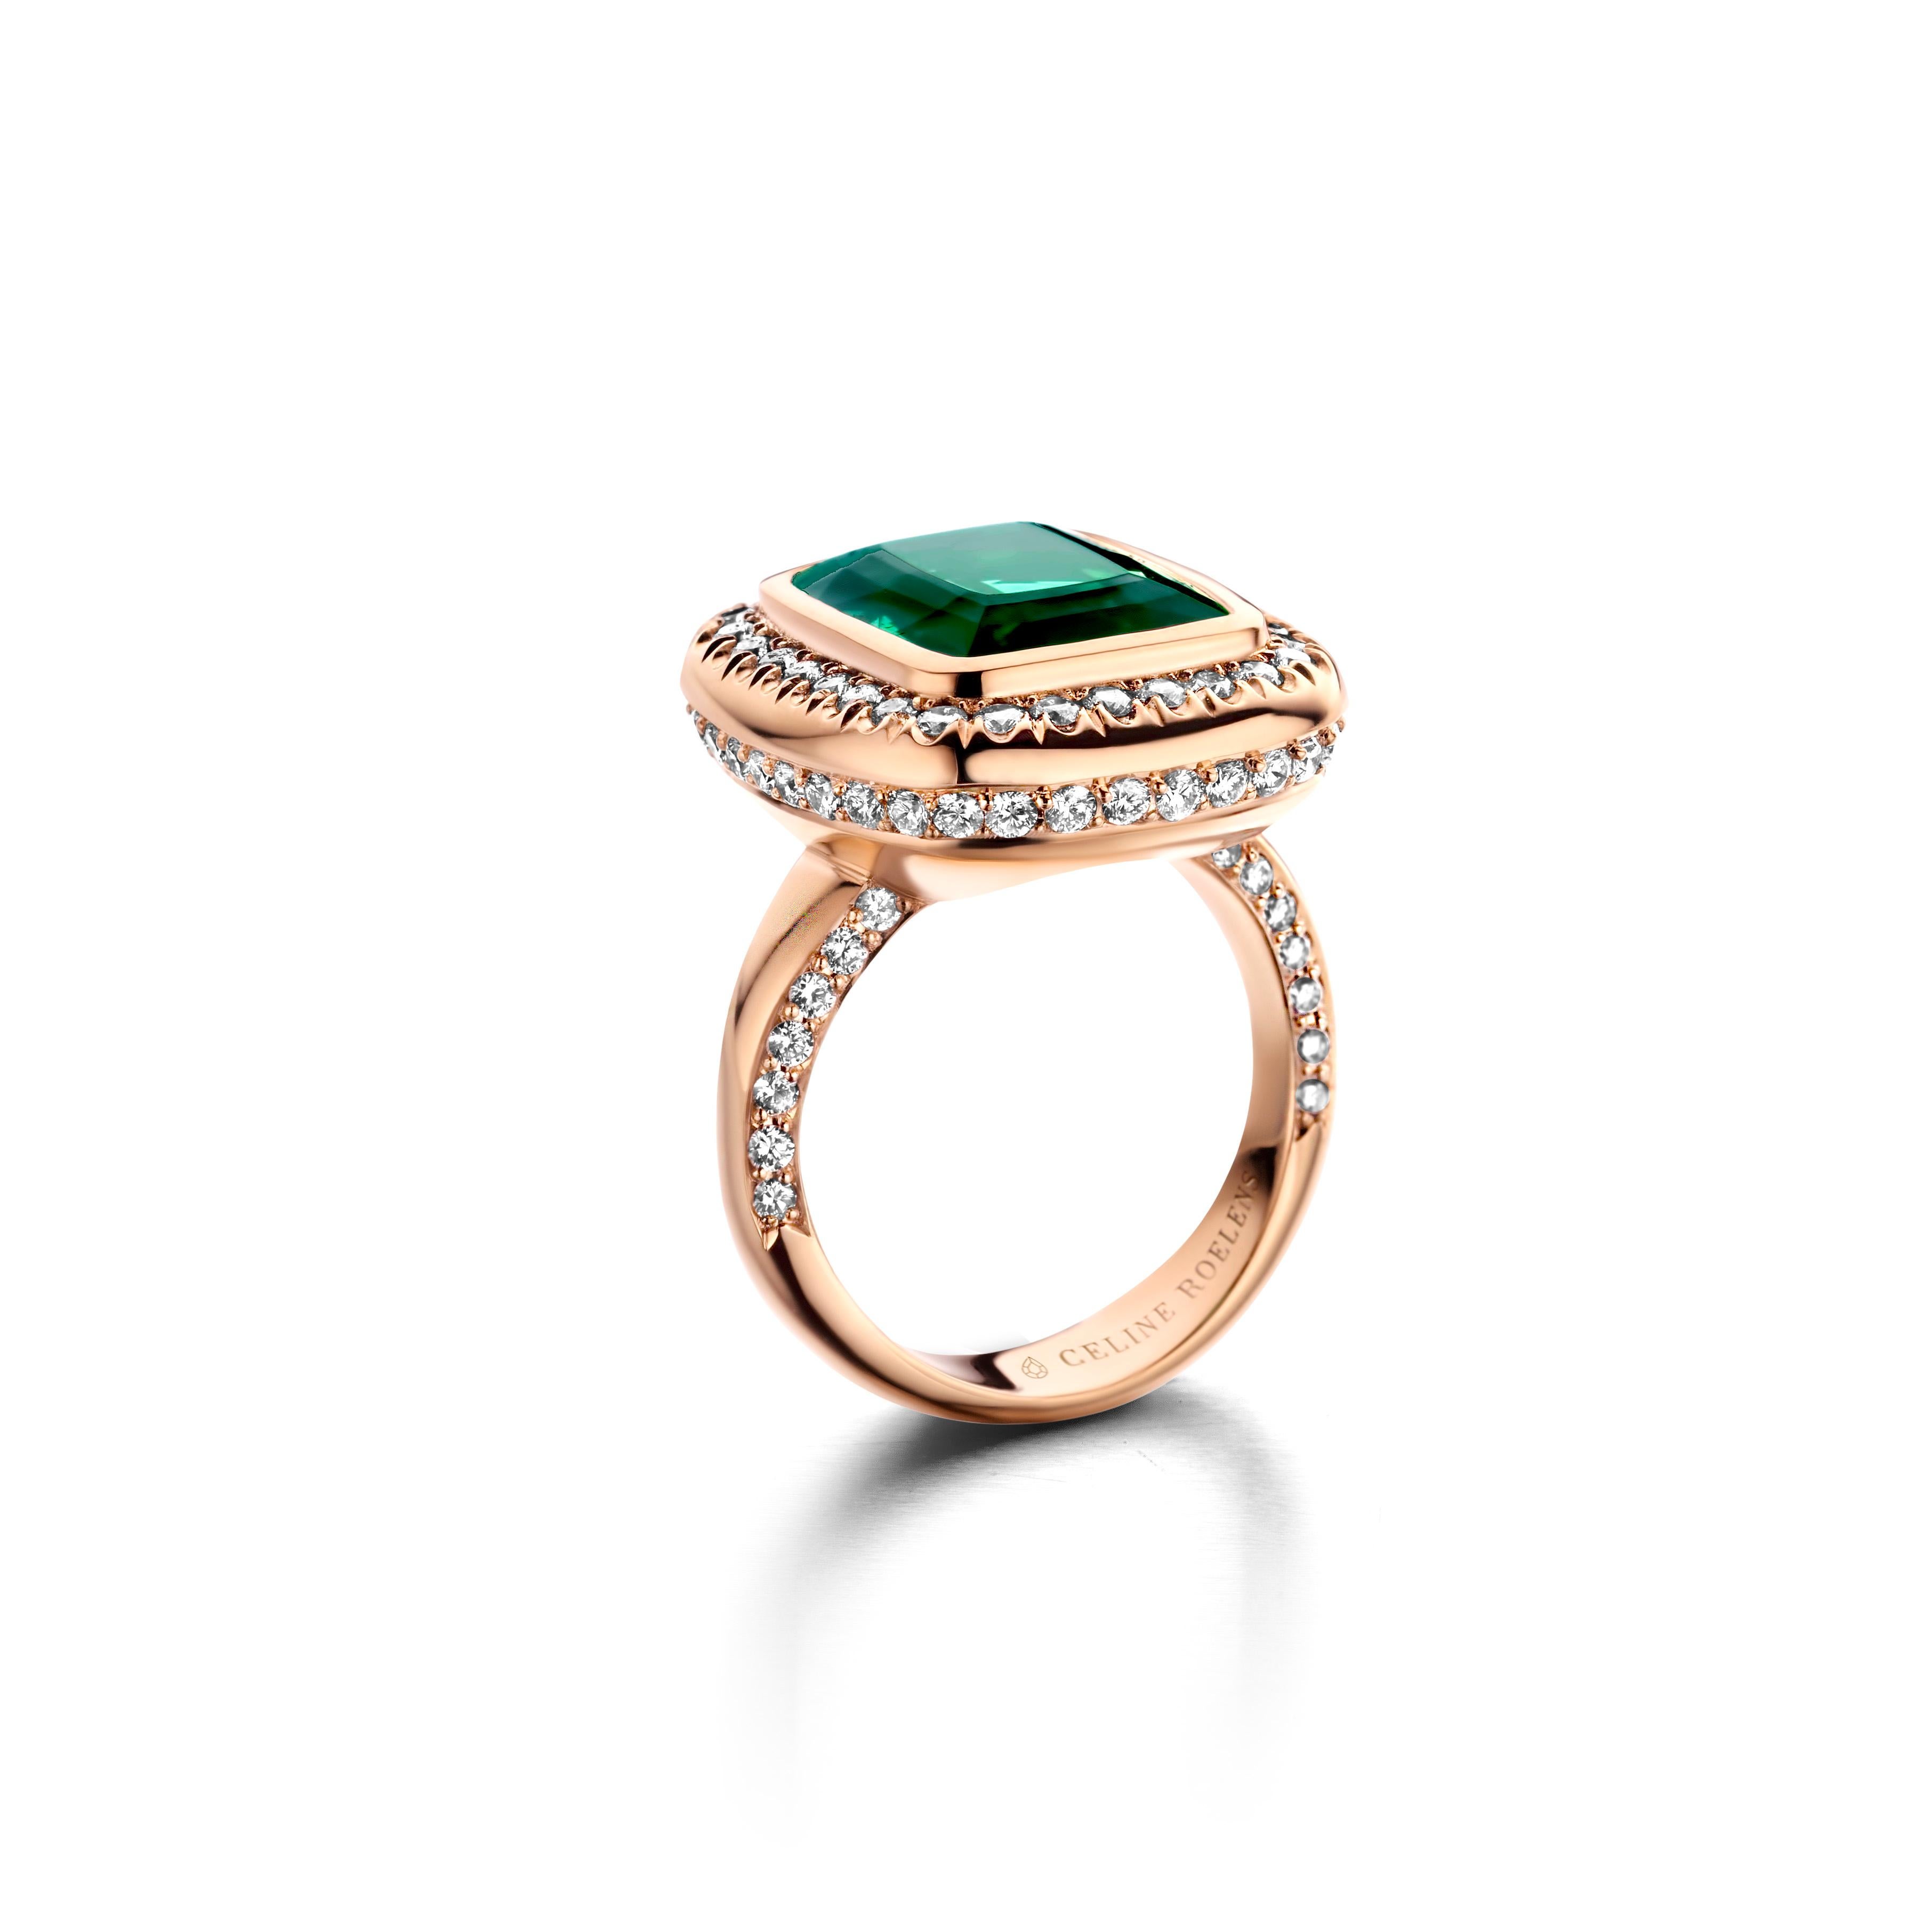 One of a kind “Aïda” ring in 18 Karat rose gold 15,2g set with 1 natural, eye-clean, vivid indicolite tourmaline in cushion cut 10,91 Carat and the finest diamonds 1,72 Carat VS/F quality in brilliant cut.

Because every indicolite tourmaline has